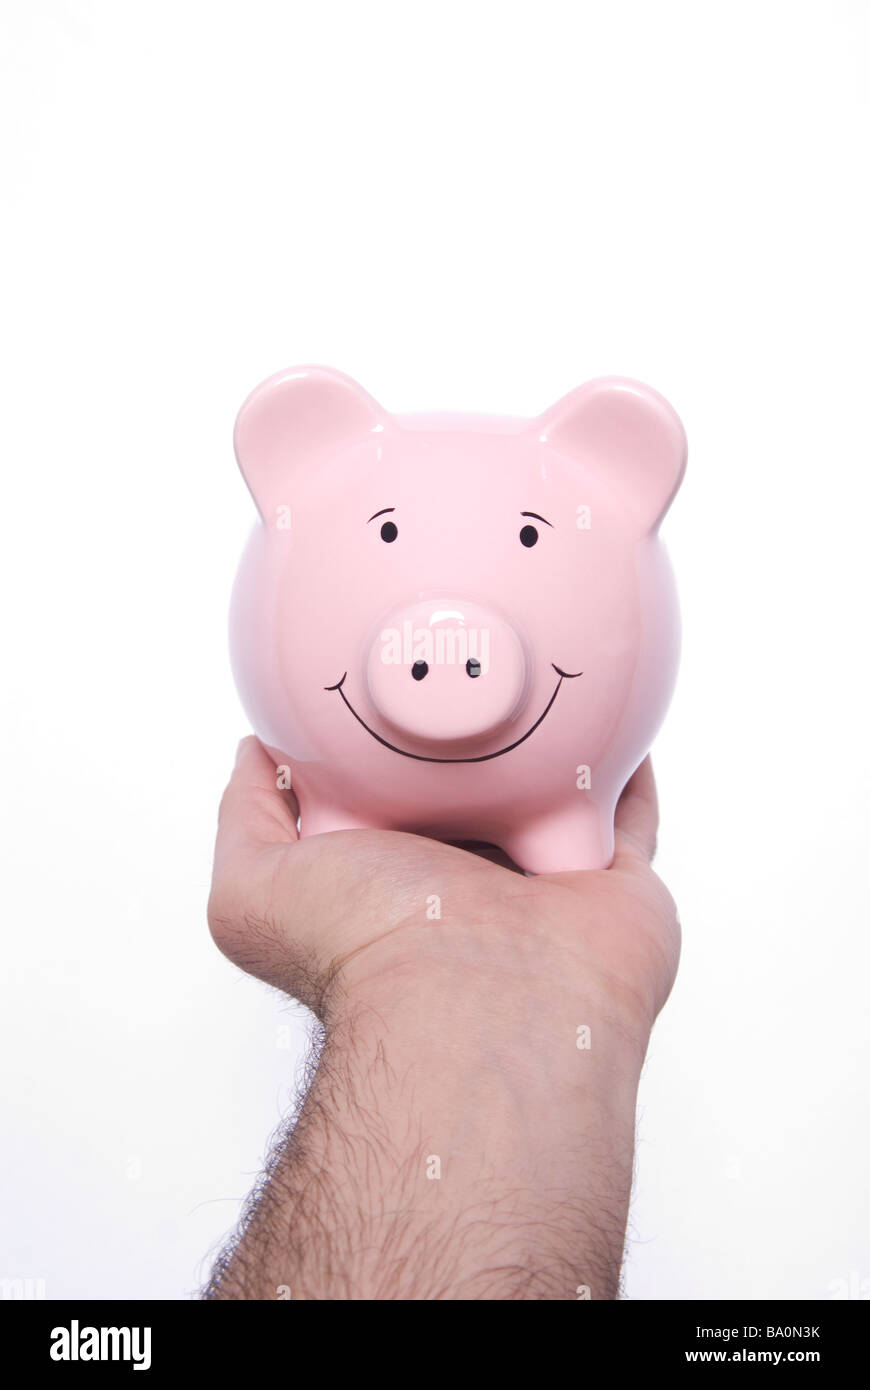 Hand holding a pink piggy bank against a white background Stock Photo